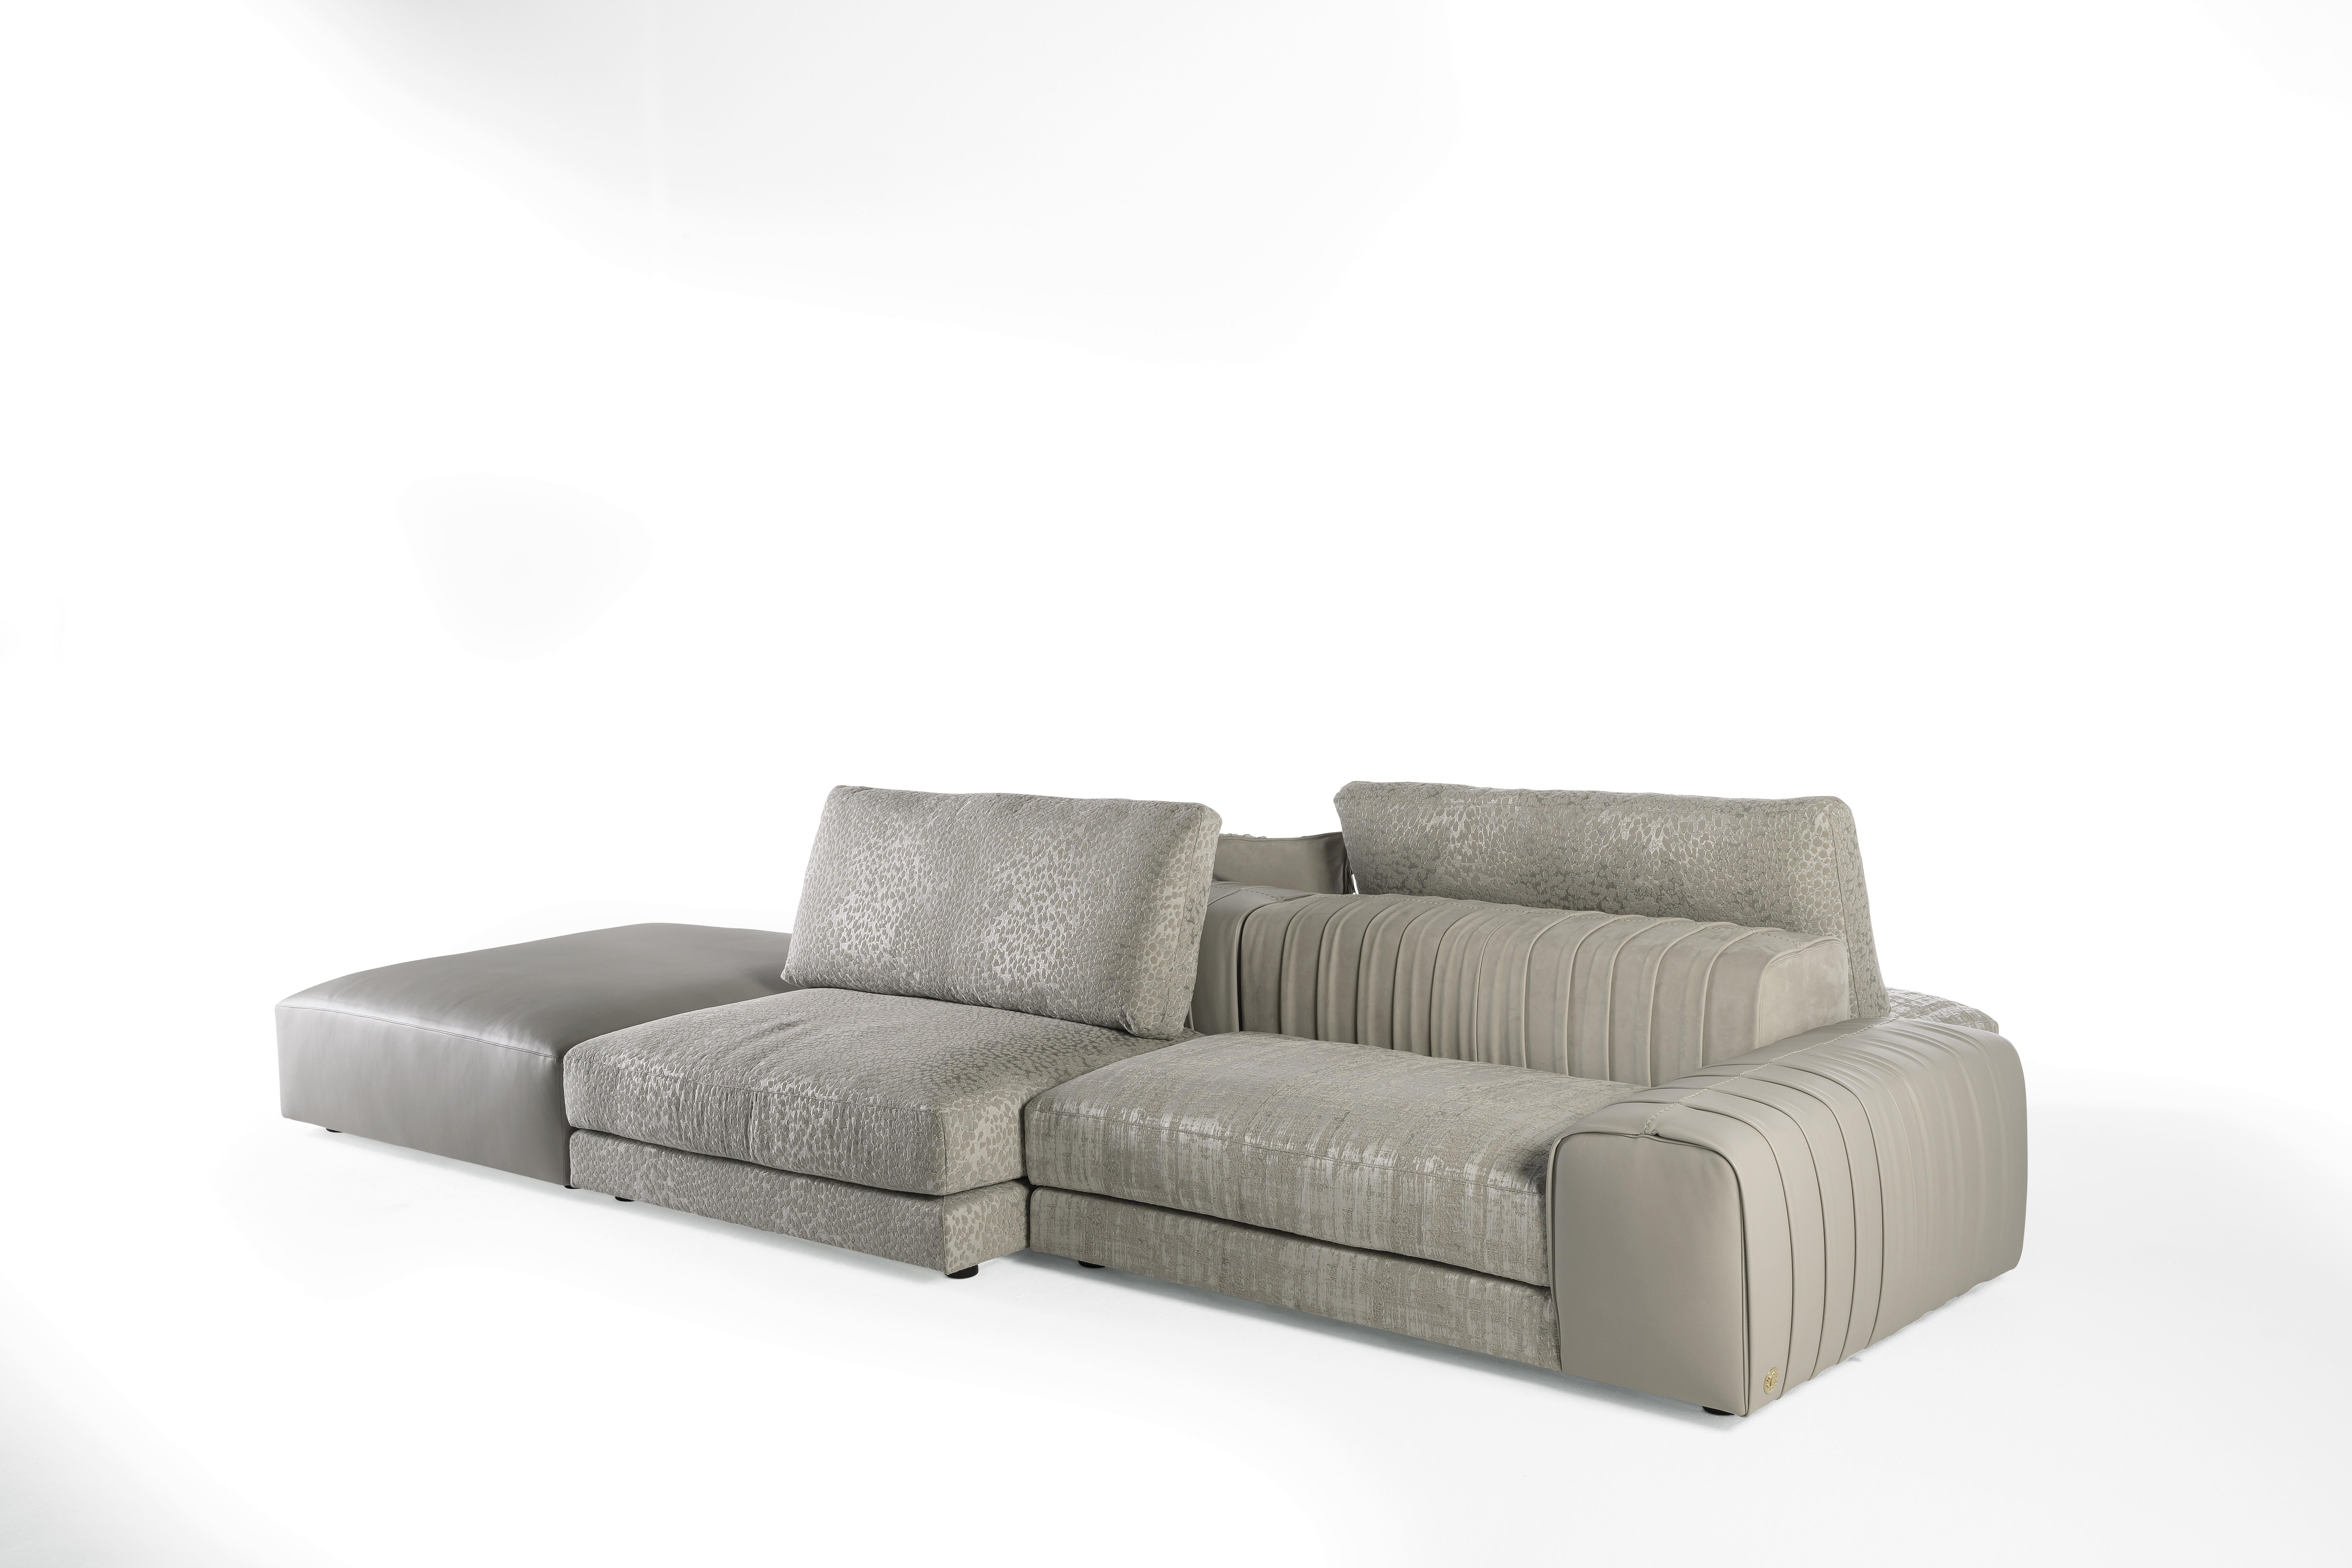 A wide and comfortable seat for the new Kingston modular sofa. Customizable in both composition and upholstery, it offers the possibility to mix and match different finishes and processes for each set. The refined manufacturing of the seatback is